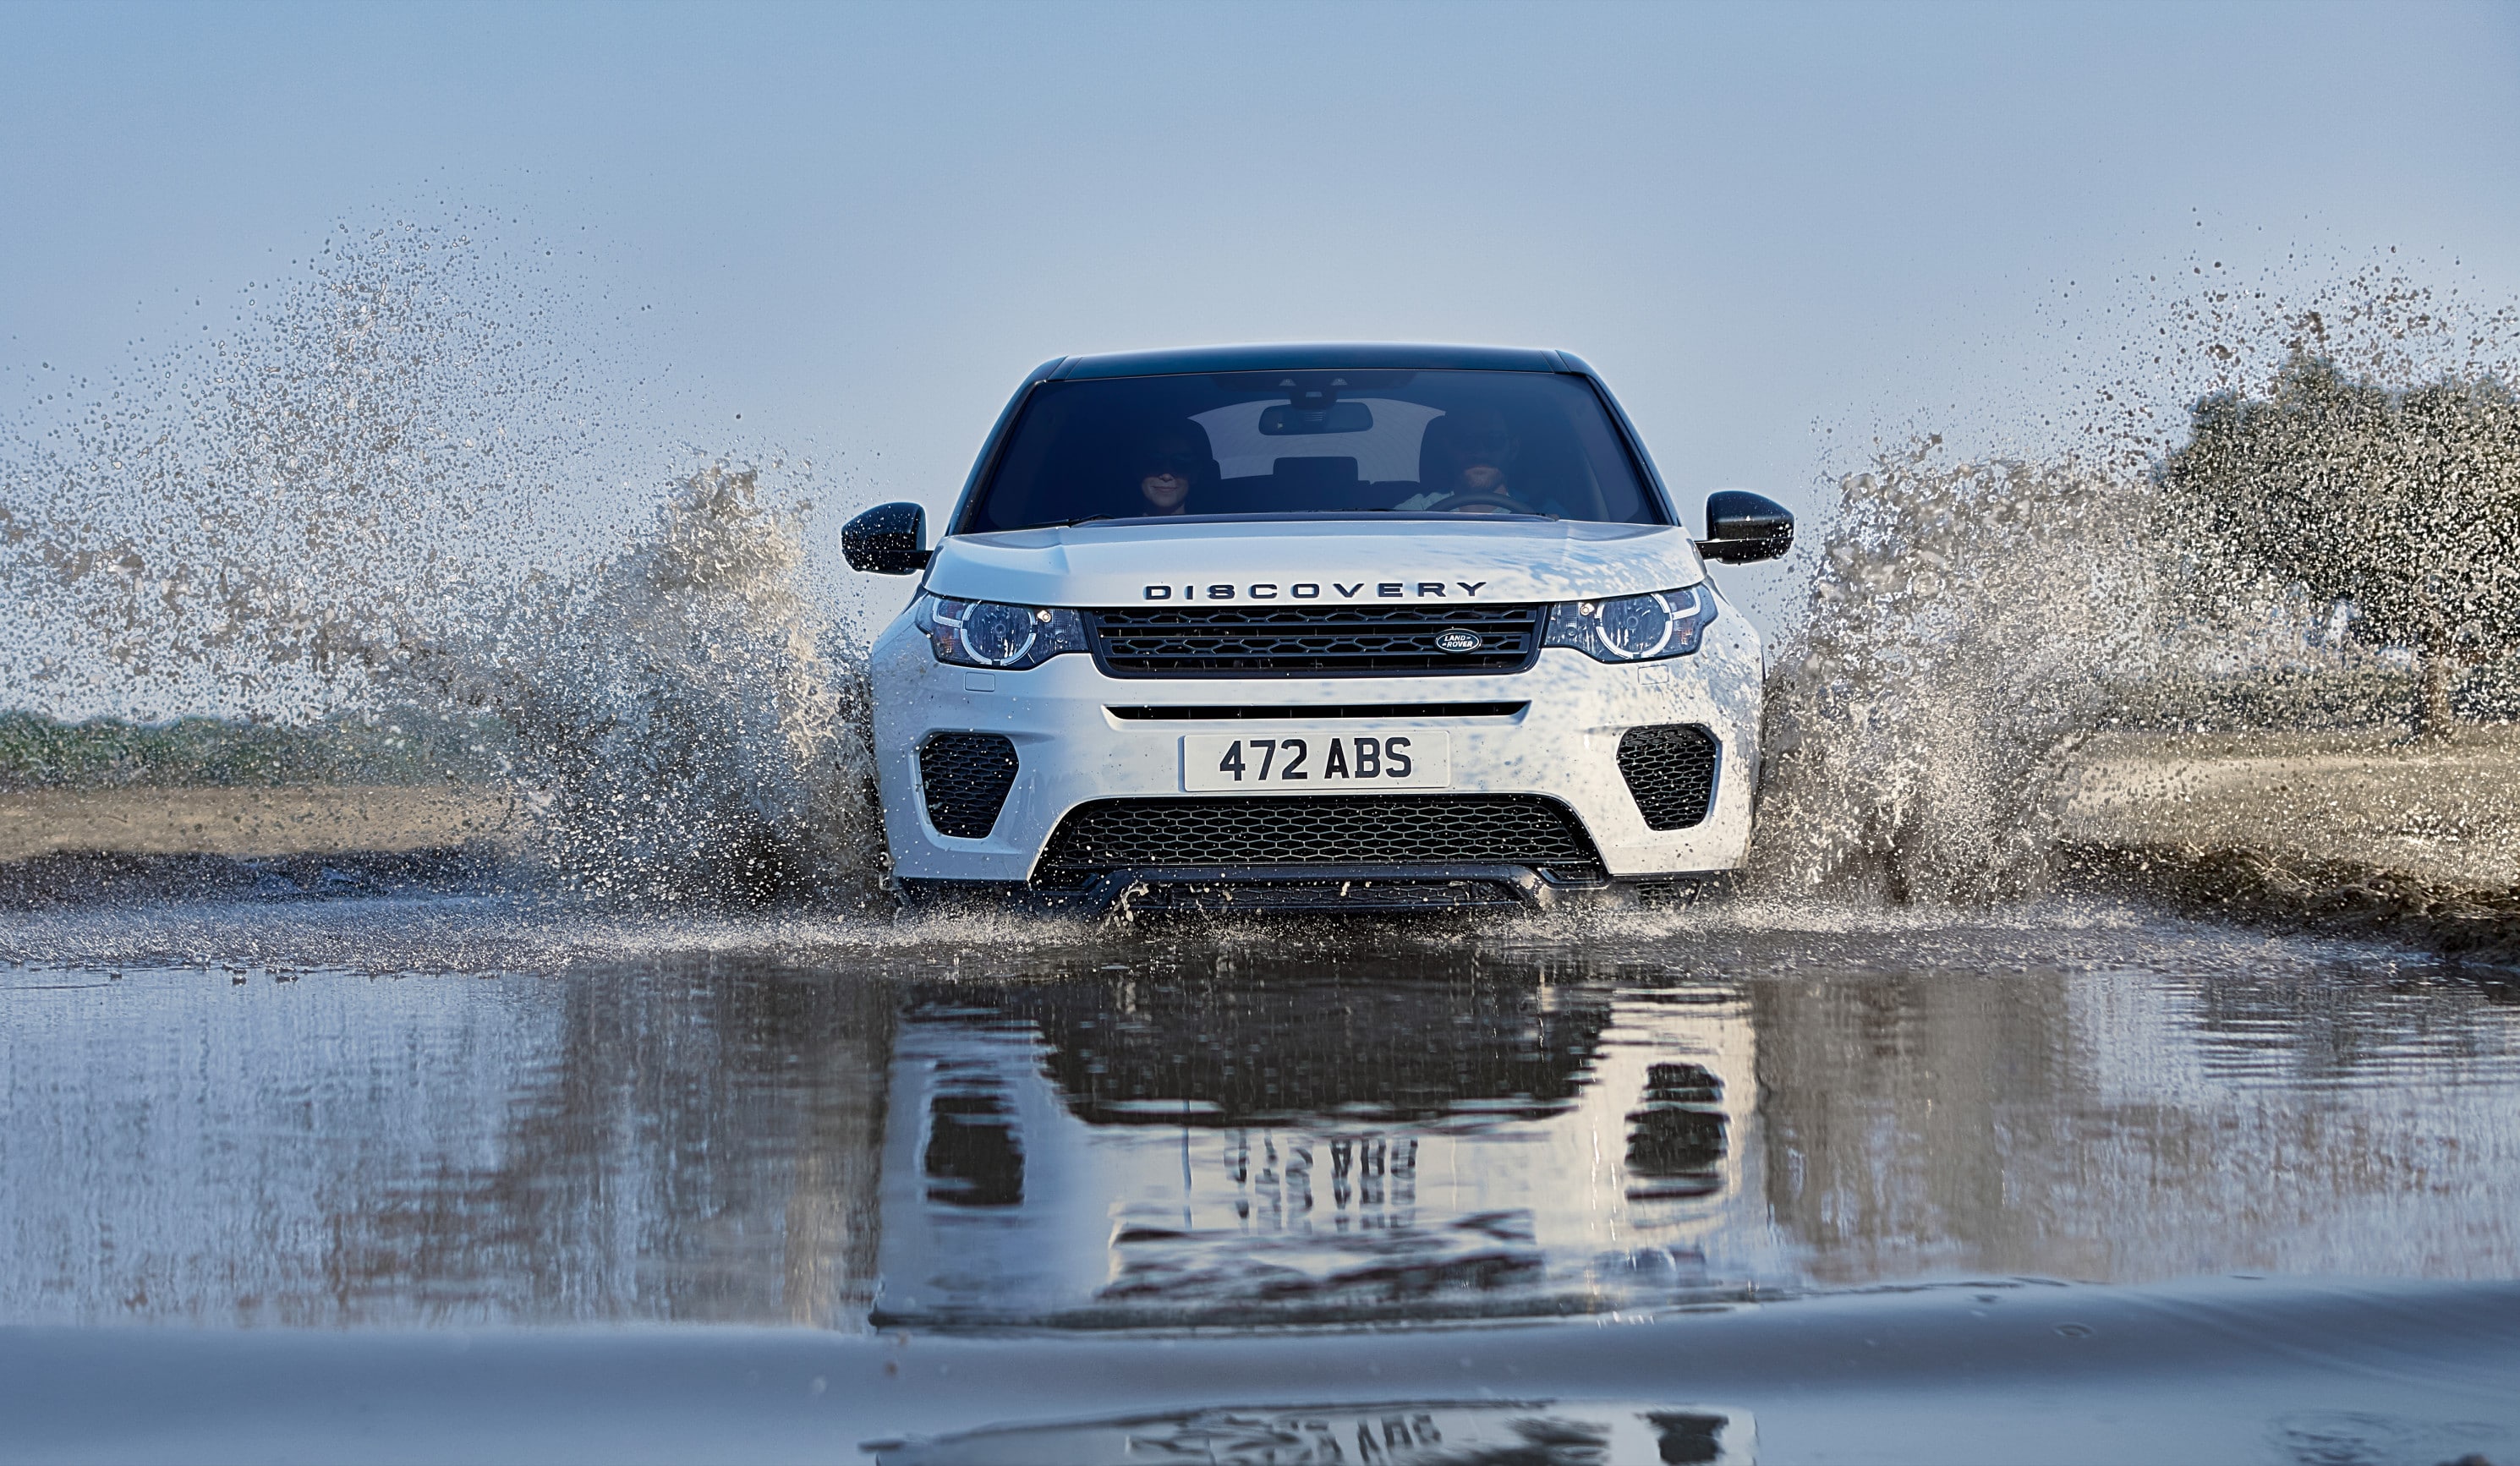 LAND ROVER DISCOVERY SPORT LANDMARK EDITION LANDS IN SOUTH